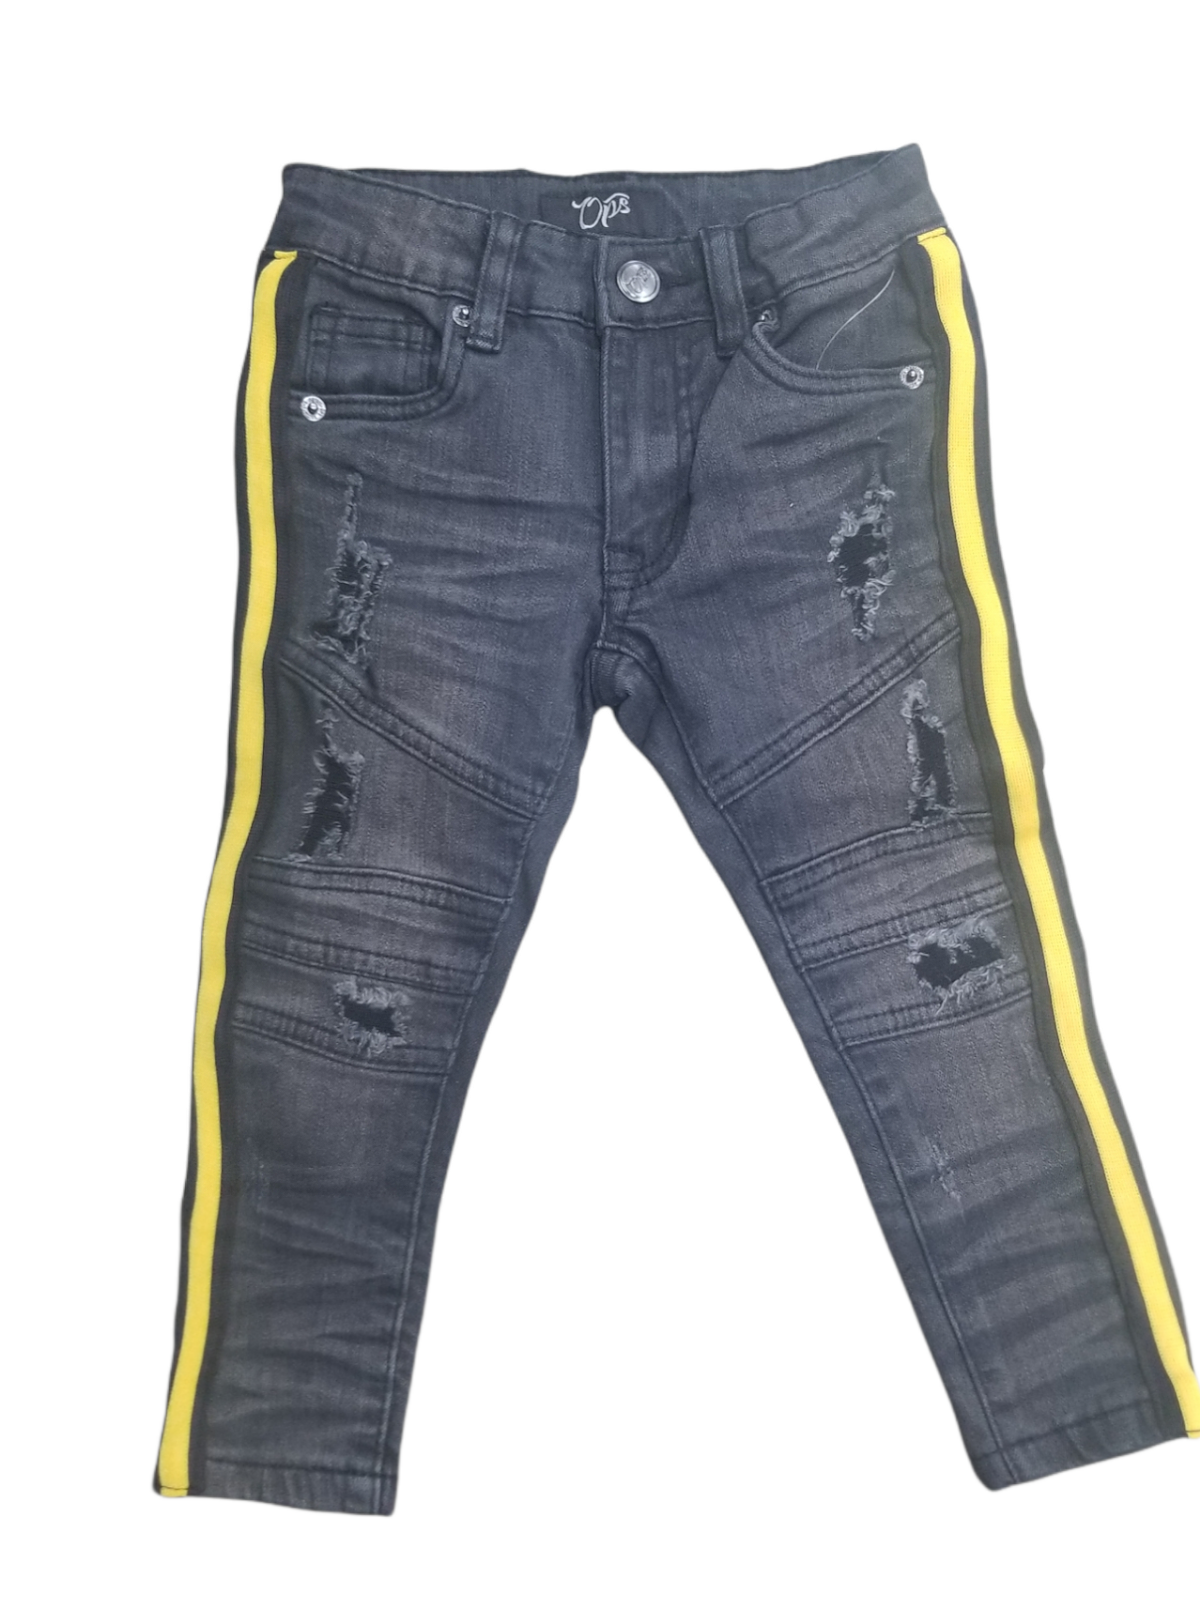 Ops Kids Jeans - Side Stripe - Black And Yellow - OPS1905K – Vengeance78